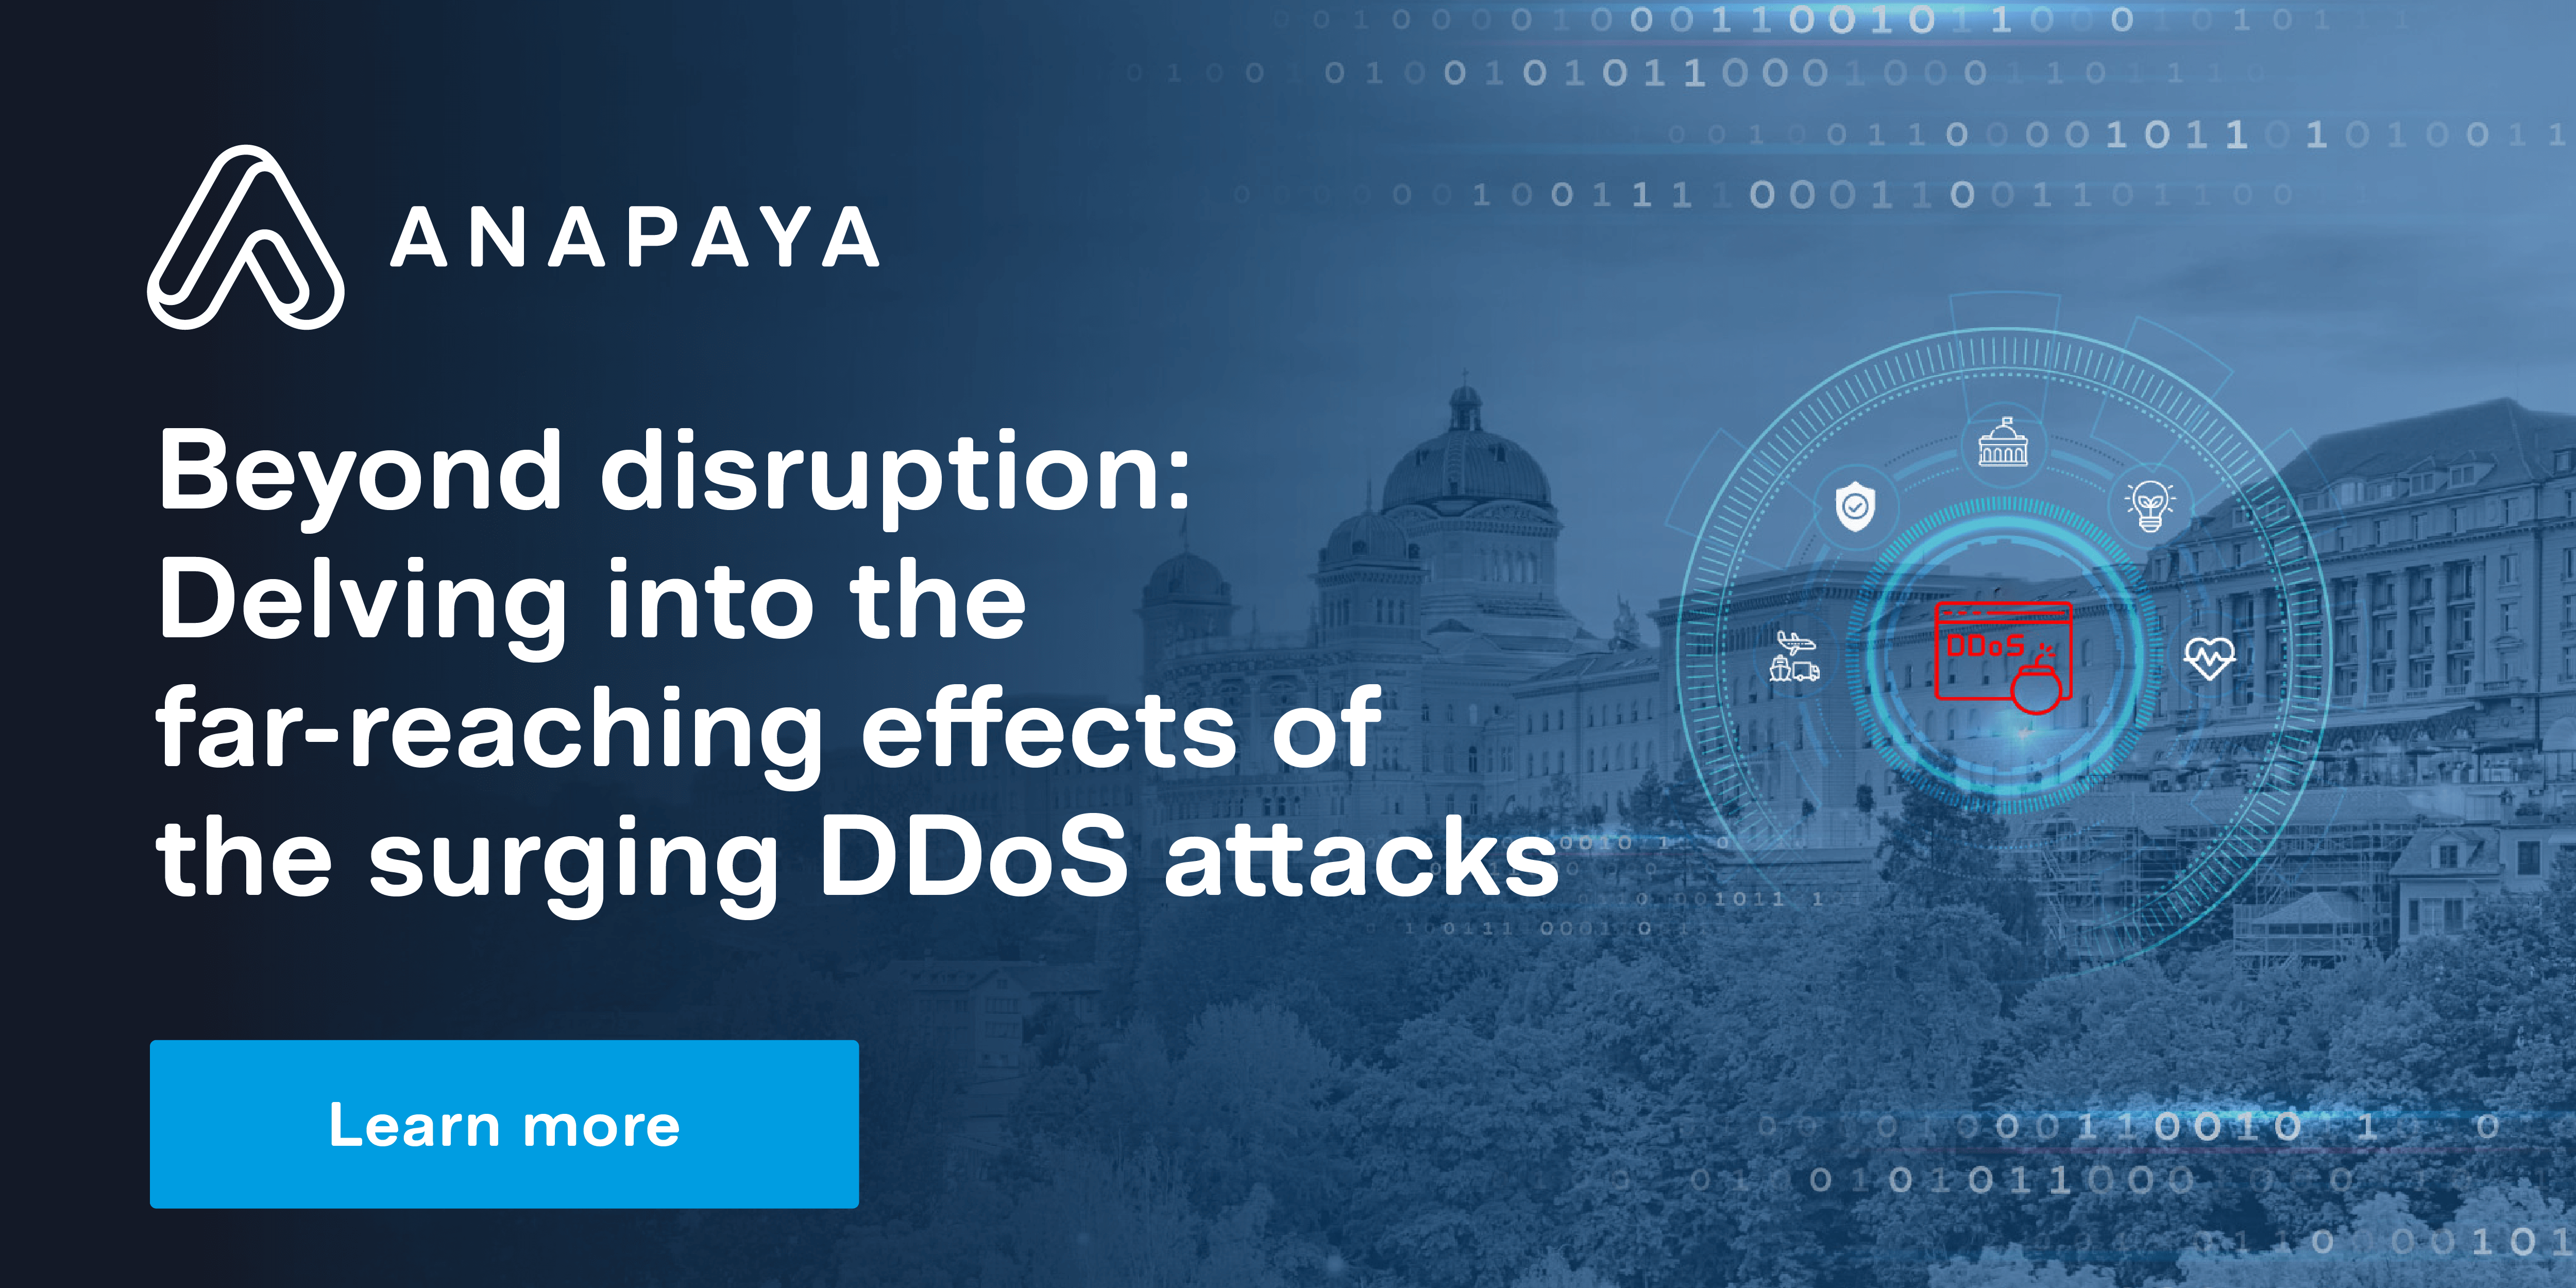 Beyond disruption: Delving into the far-reaching effects of the surging DDoS attacks